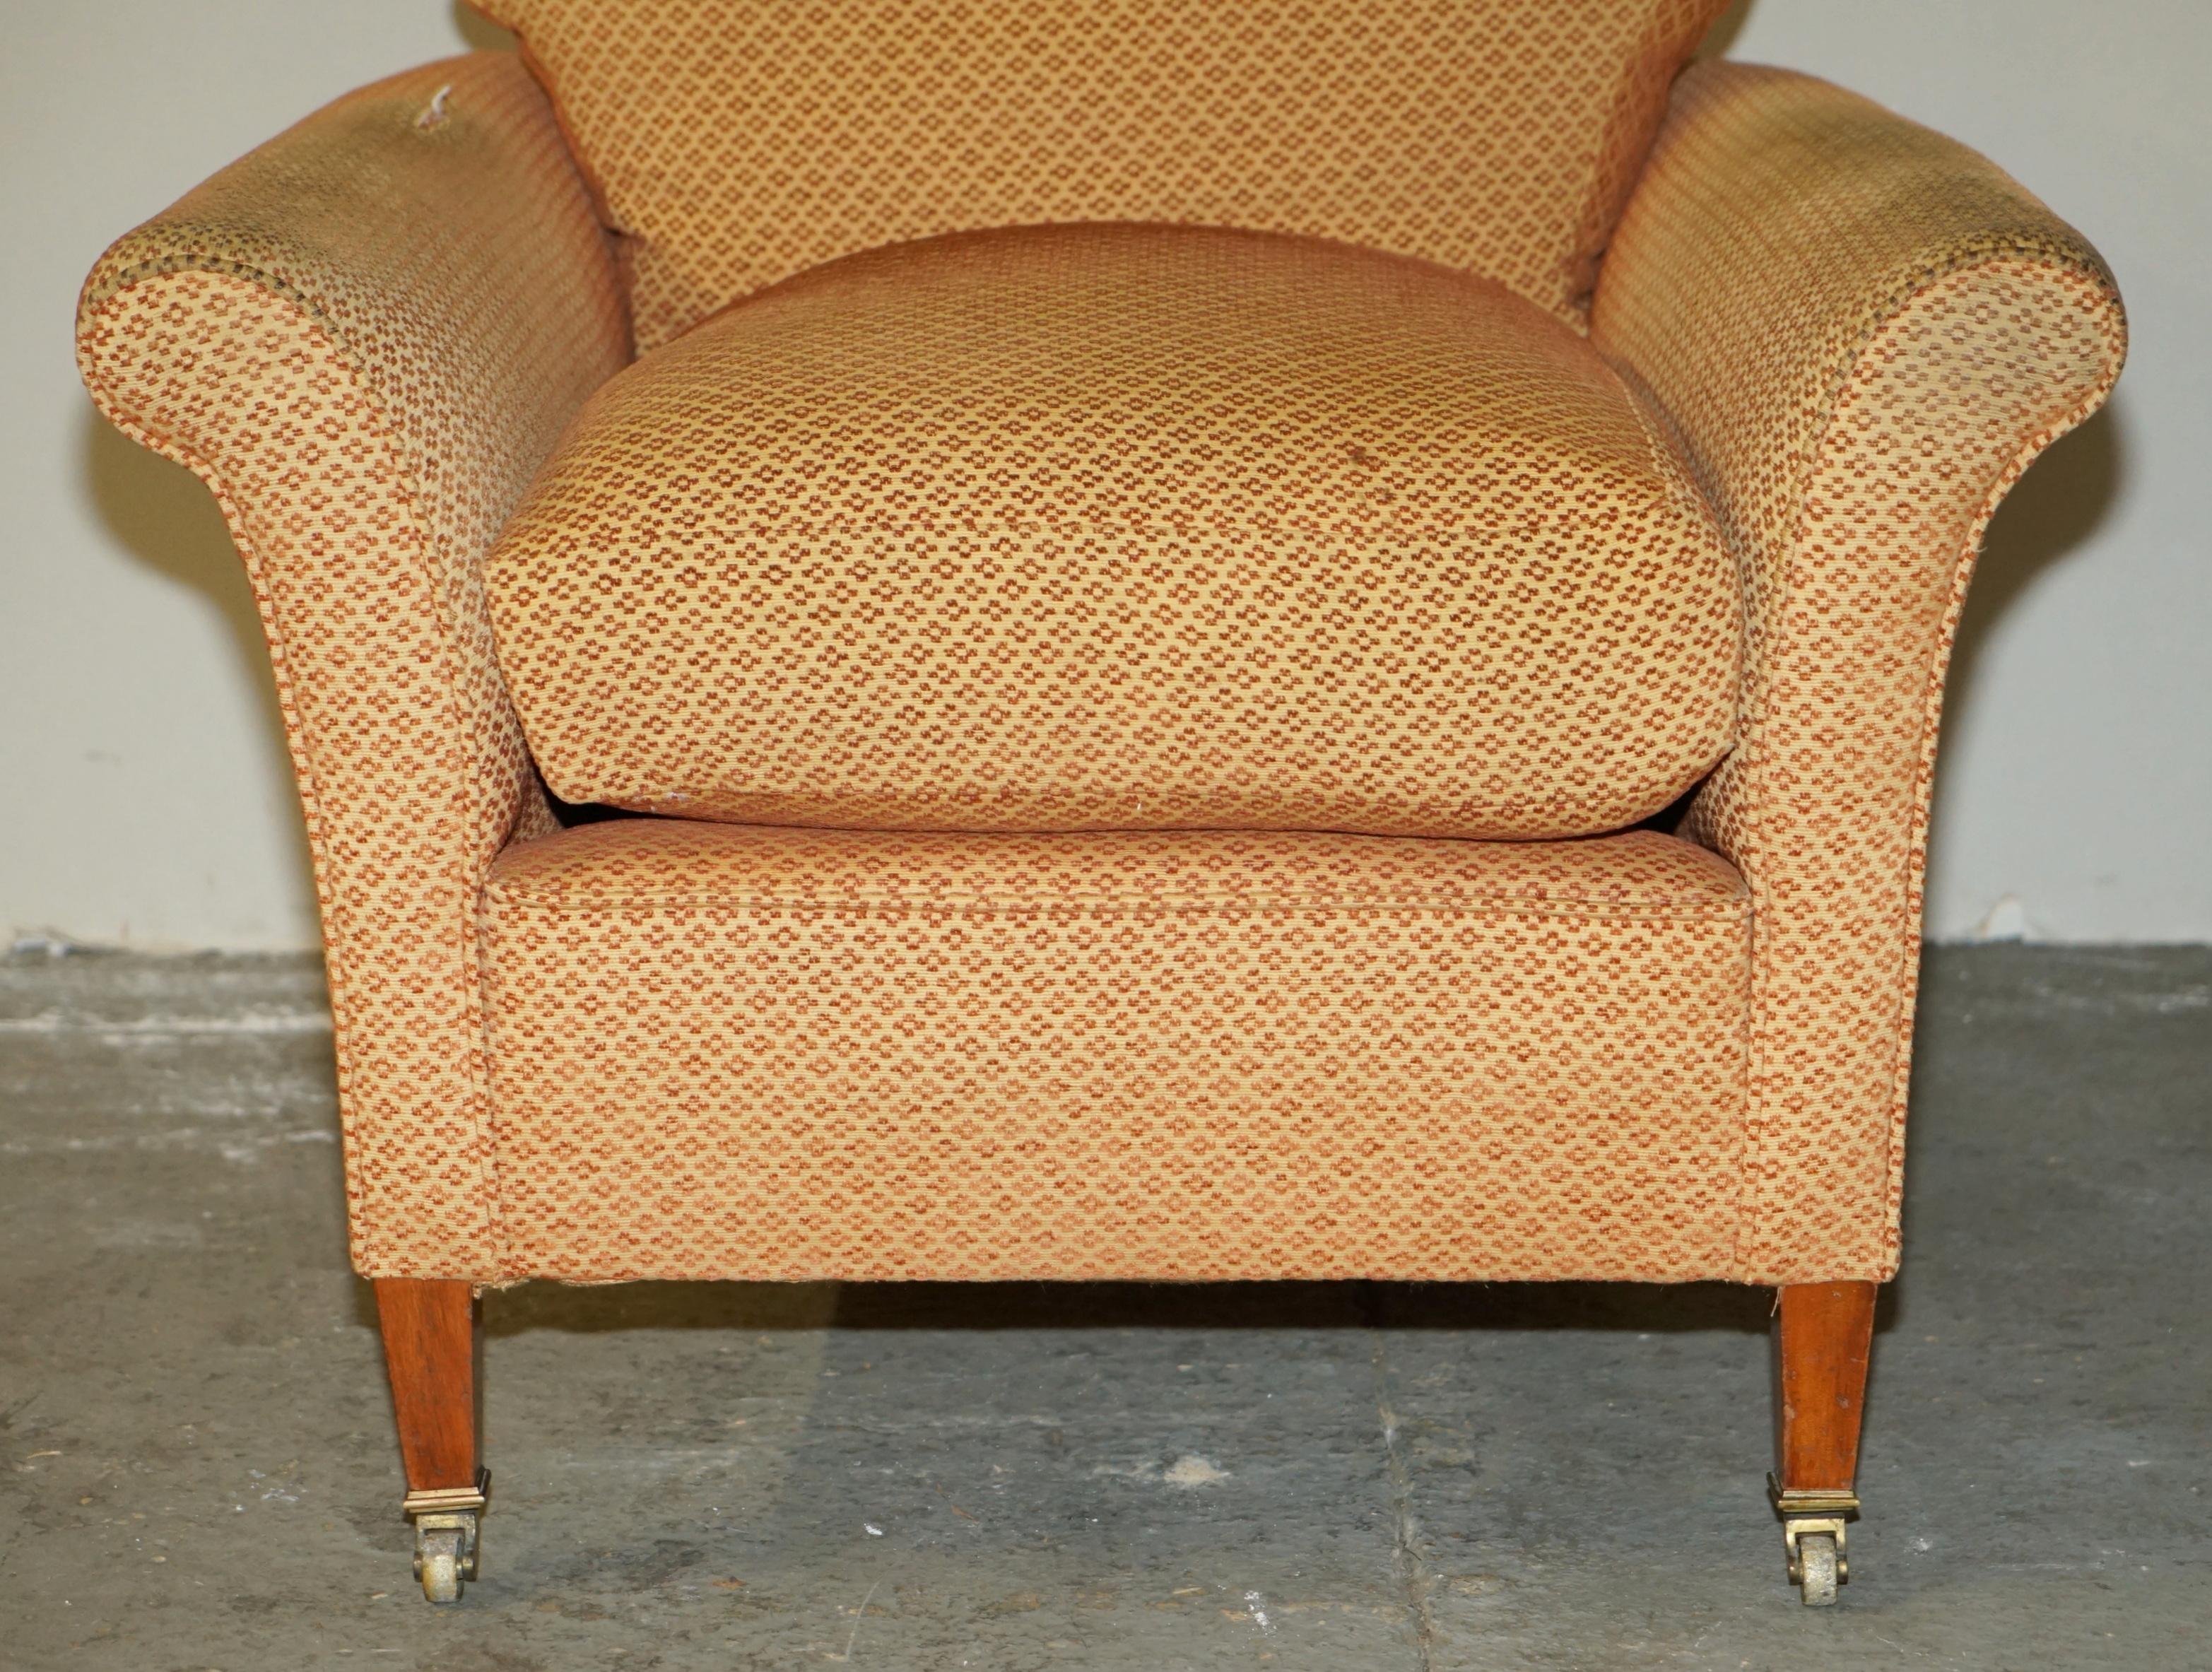 Upholstery PAIR OF ANTIQUE ViCTORIAN HOWARD & SON'S ARMCHAIRS FOR UPHOLSTERY RESTORATION For Sale